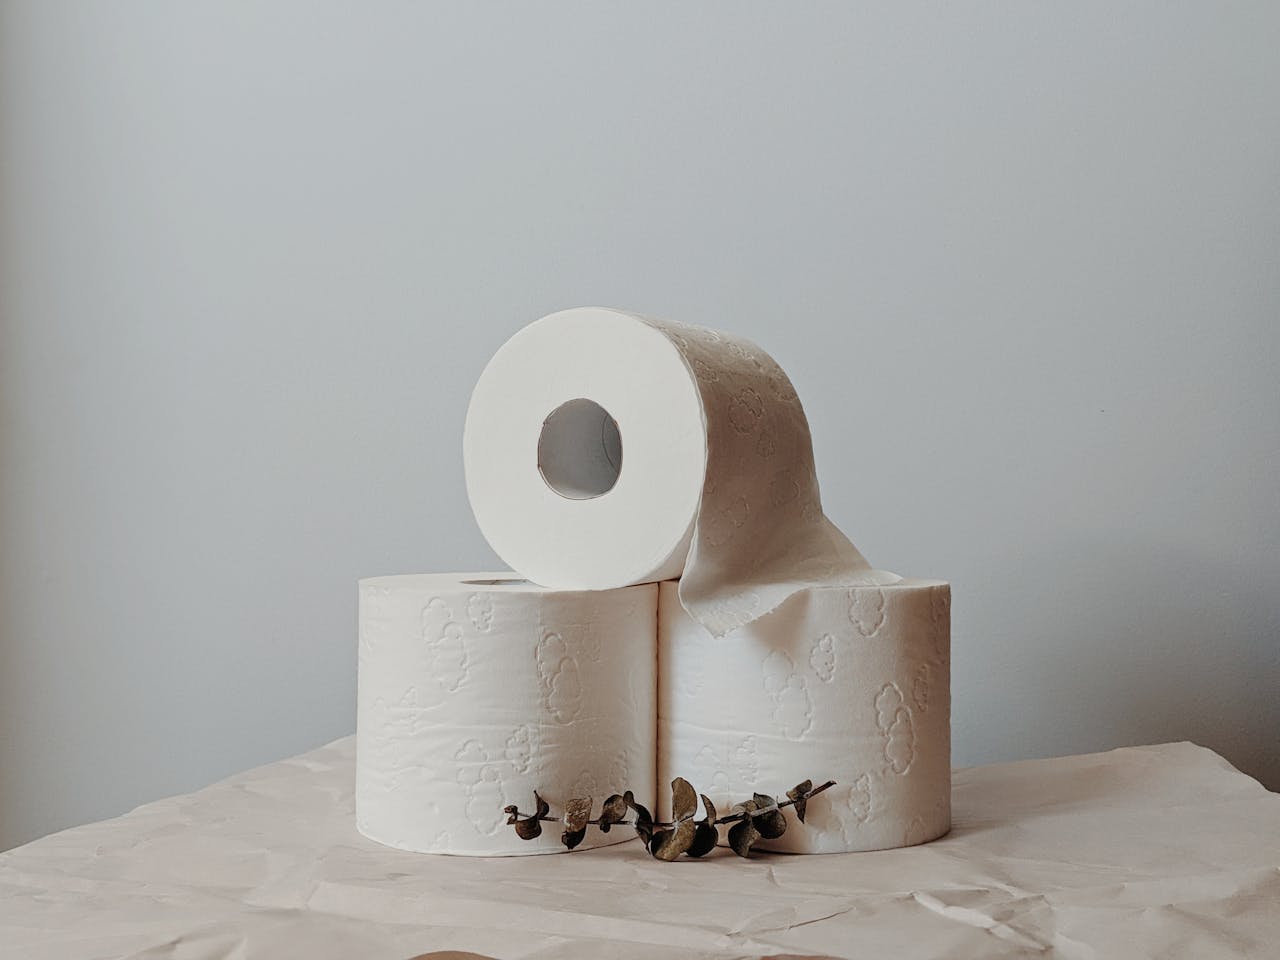 The Ultimate Guide to Sustainable Party Planning with Tanki's Toilet Tissue and Earth-Friendly Choices